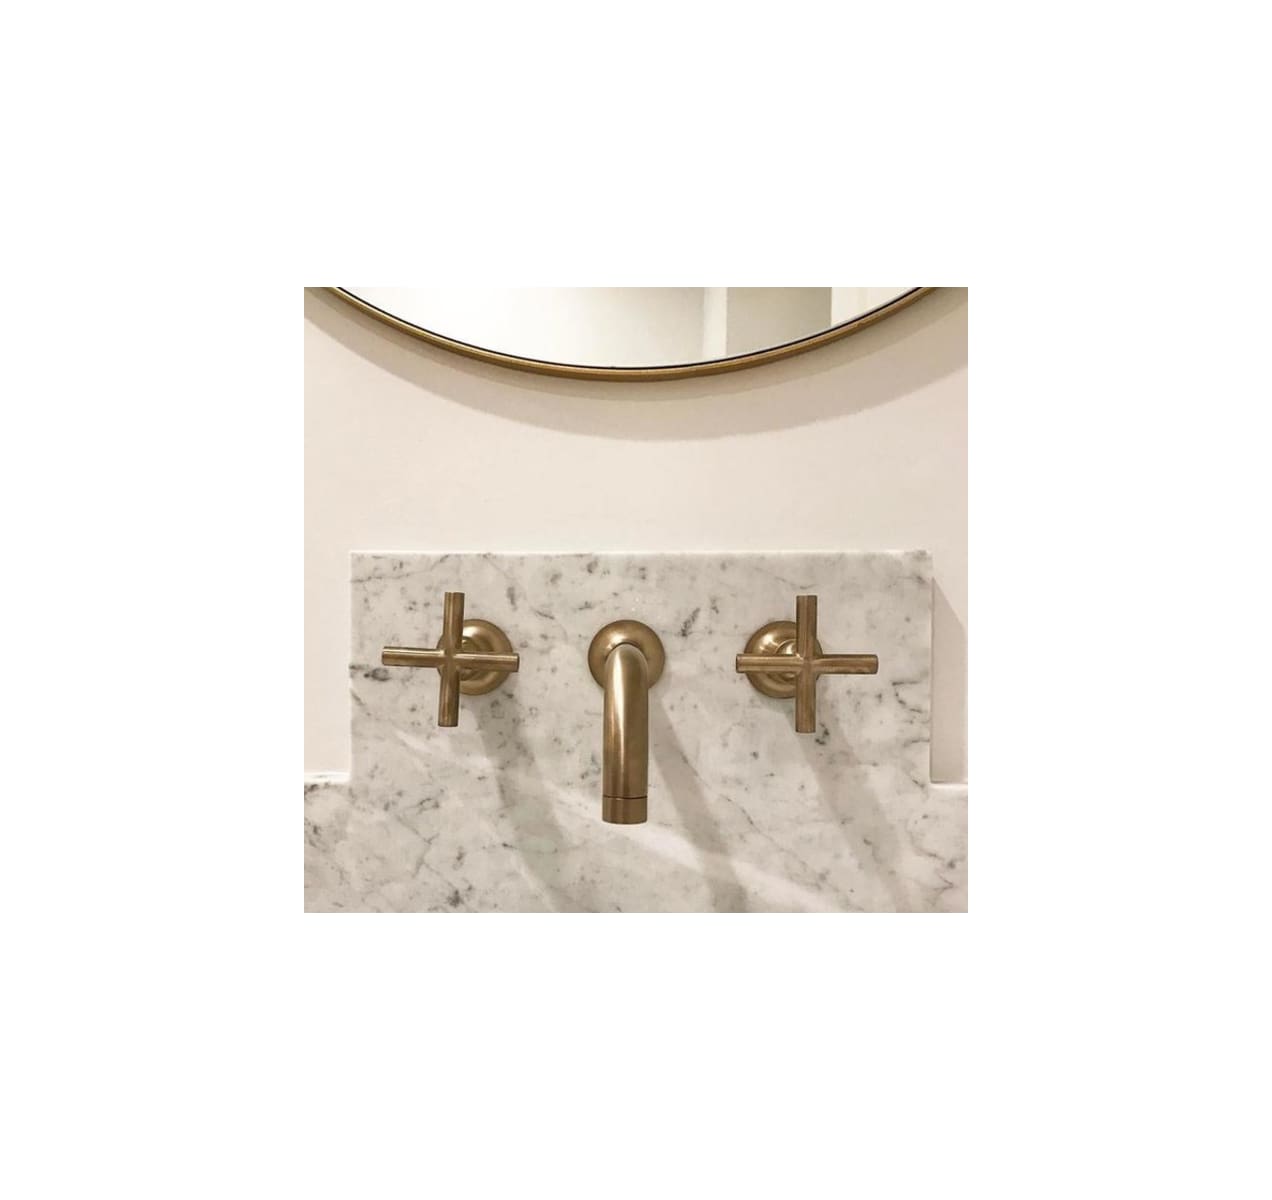 Without Drain Assembly Kohler K-T14414-3-CP Purist Wall Mount Bathroom Faucet